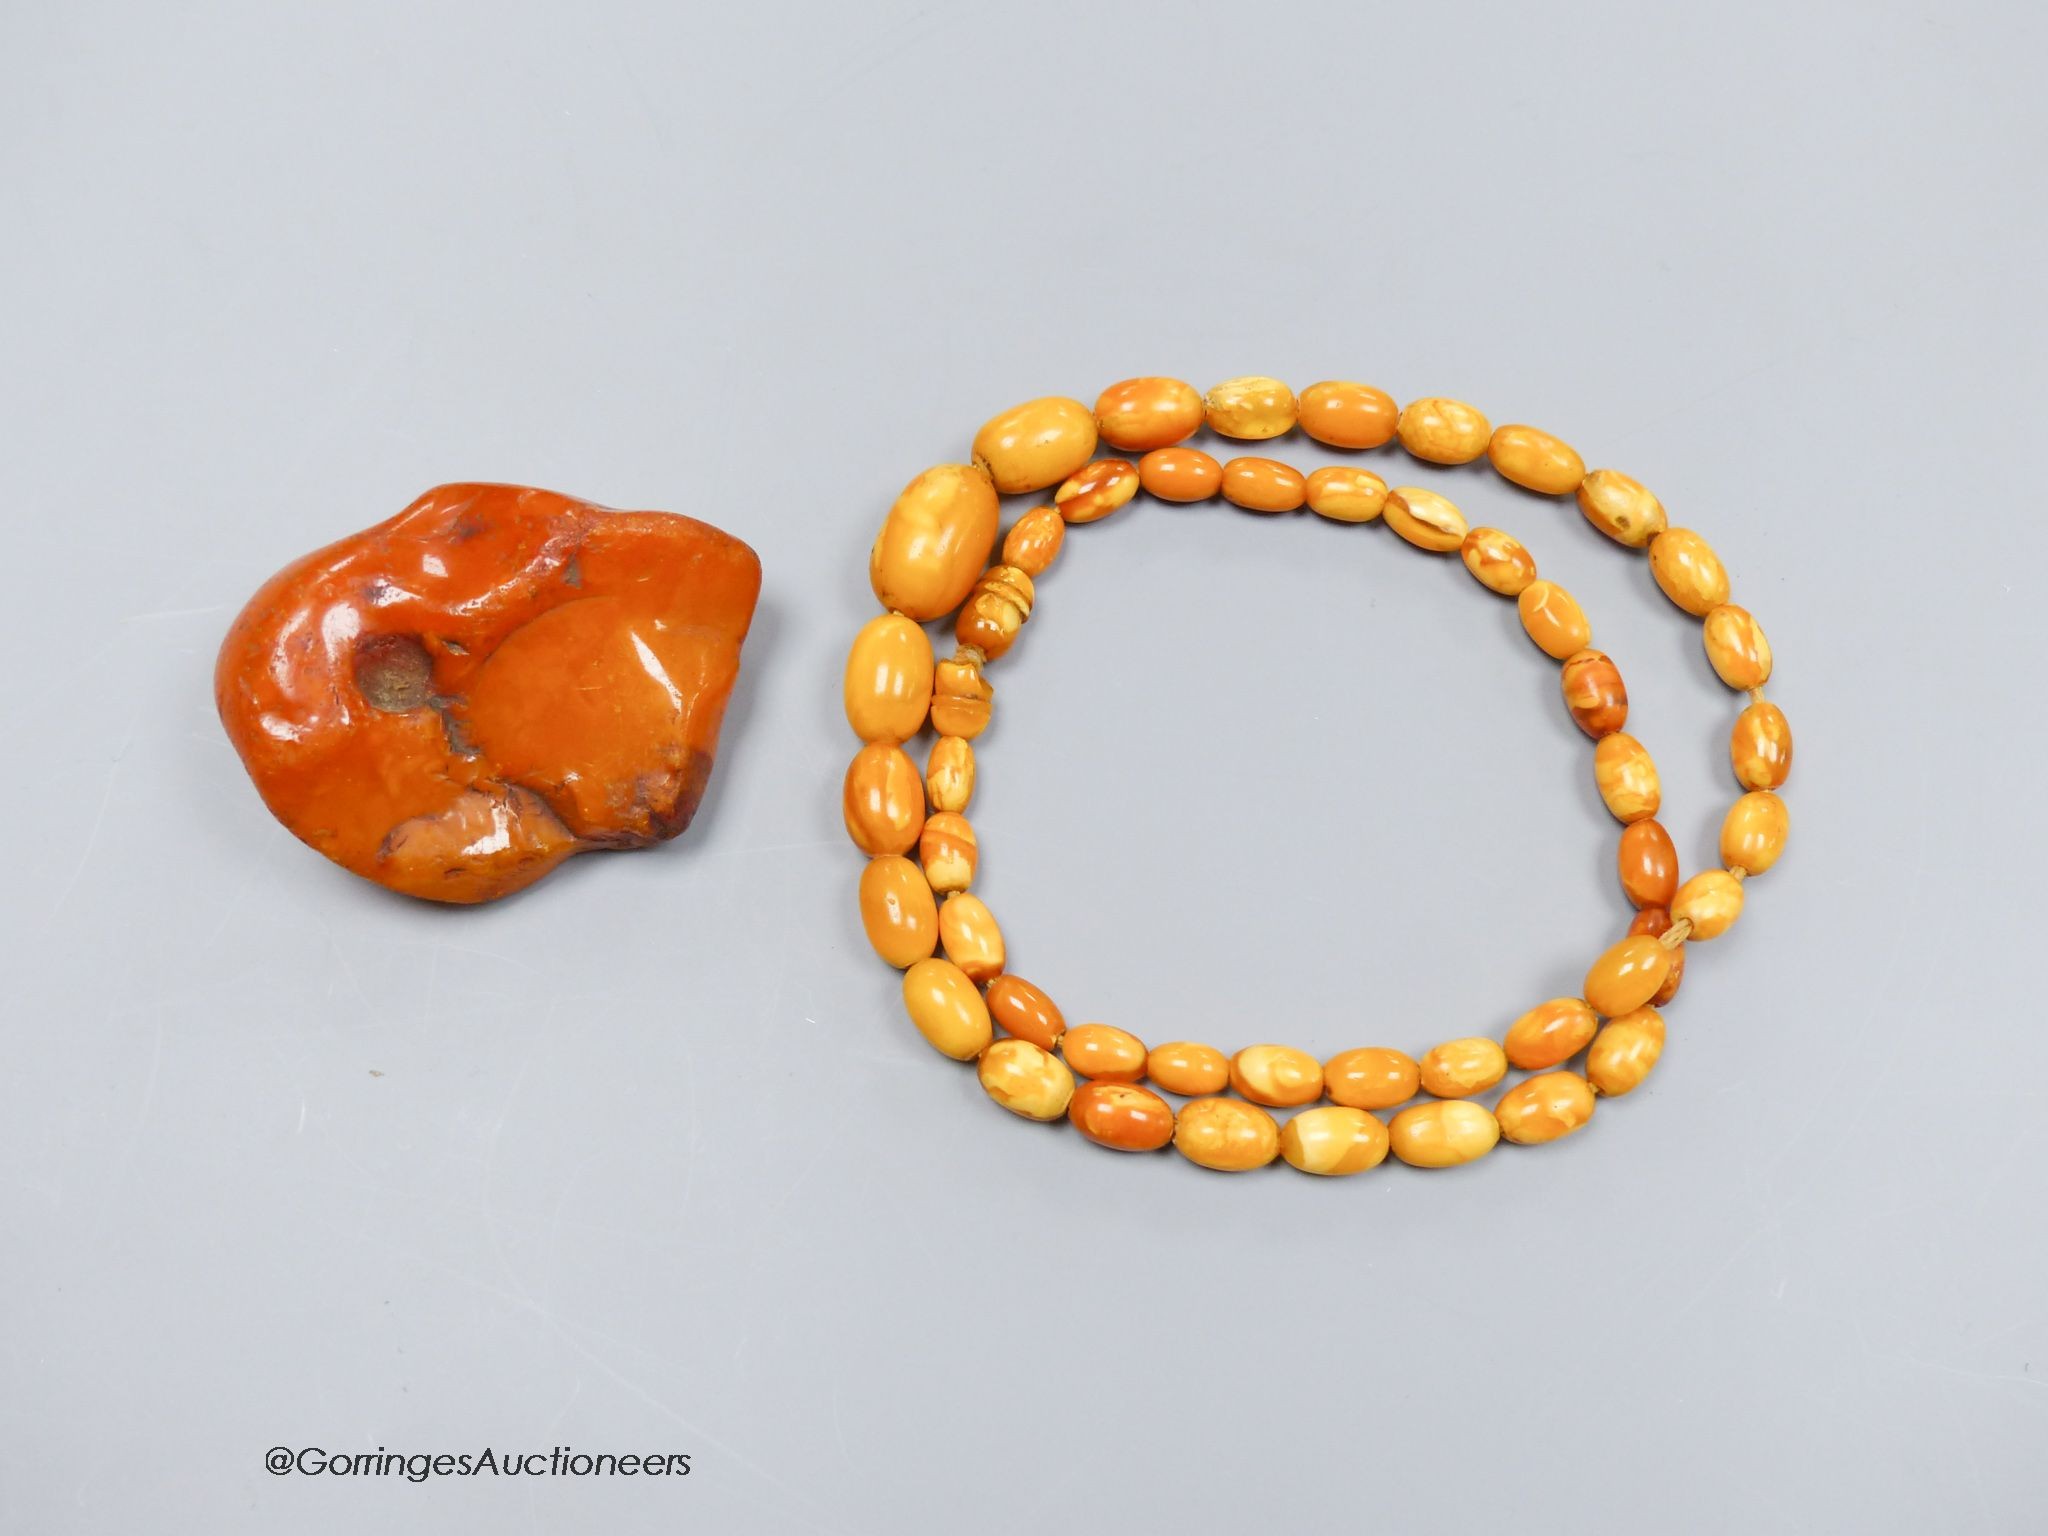 A string of amber beads and a specimen piece of Baltic amber